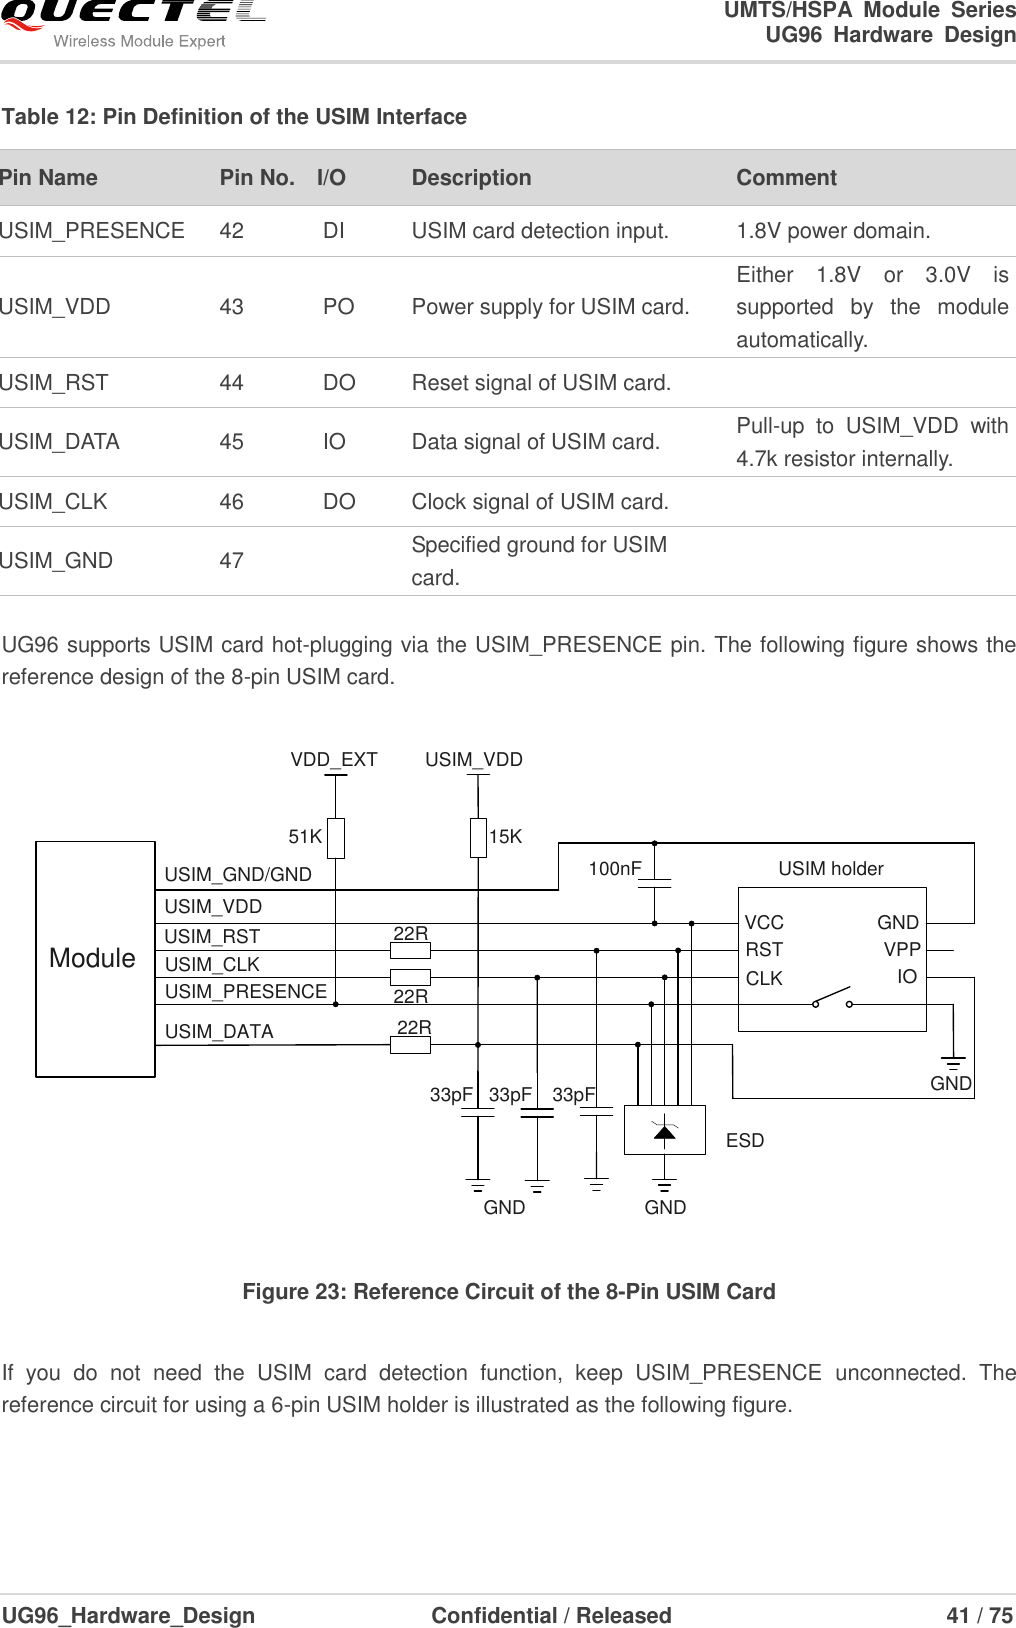                                                                        UMTS/HSPA  Module  Series                                                                 UG96  Hardware  Design  UG96_Hardware_Design                  Confidential / Released                             41 / 75    Table 12: Pin Definition of the USIM Interface Pin Name   Pin No.  I/O Description Comment USIM_PRESENCE 42 DI USIM card detection input. 1.8V power domain. USIM_VDD 43 PO Power supply for USIM card. Either  1.8V  or  3.0V  is supported  by  the  module automatically. USIM_RST 44 DO Reset signal of USIM card.  USIM_DATA 45 IO Data signal of USIM card. Pull-up  to  USIM_VDD  with 4.7k resistor internally. USIM_CLK 46 DO Clock signal of USIM card.  USIM_GND 47  Specified ground for USIM card.   UG96 supports USIM card hot-plugging via the USIM_PRESENCE pin. The following figure shows the reference design of the 8-pin USIM card.  USIM_VDDUSIM_GND/GNDUSIM_RSTUSIM_CLKUSIM_DATAUSIM_PRESENCE22R22R22RVDD_EXT51K100nF USIM holderGNDGNDESD33pF 33pF 33pFVCCRSTCLK IOVPPGNDGNDUSIM_VDD15KModule Figure 23: Reference Circuit of the 8-Pin USIM Card  If  you  do  not  need  the  USIM  card  detection  function,  keep  USIM_PRESENCE  unconnected.  The reference circuit for using a 6-pin USIM holder is illustrated as the following figure.  